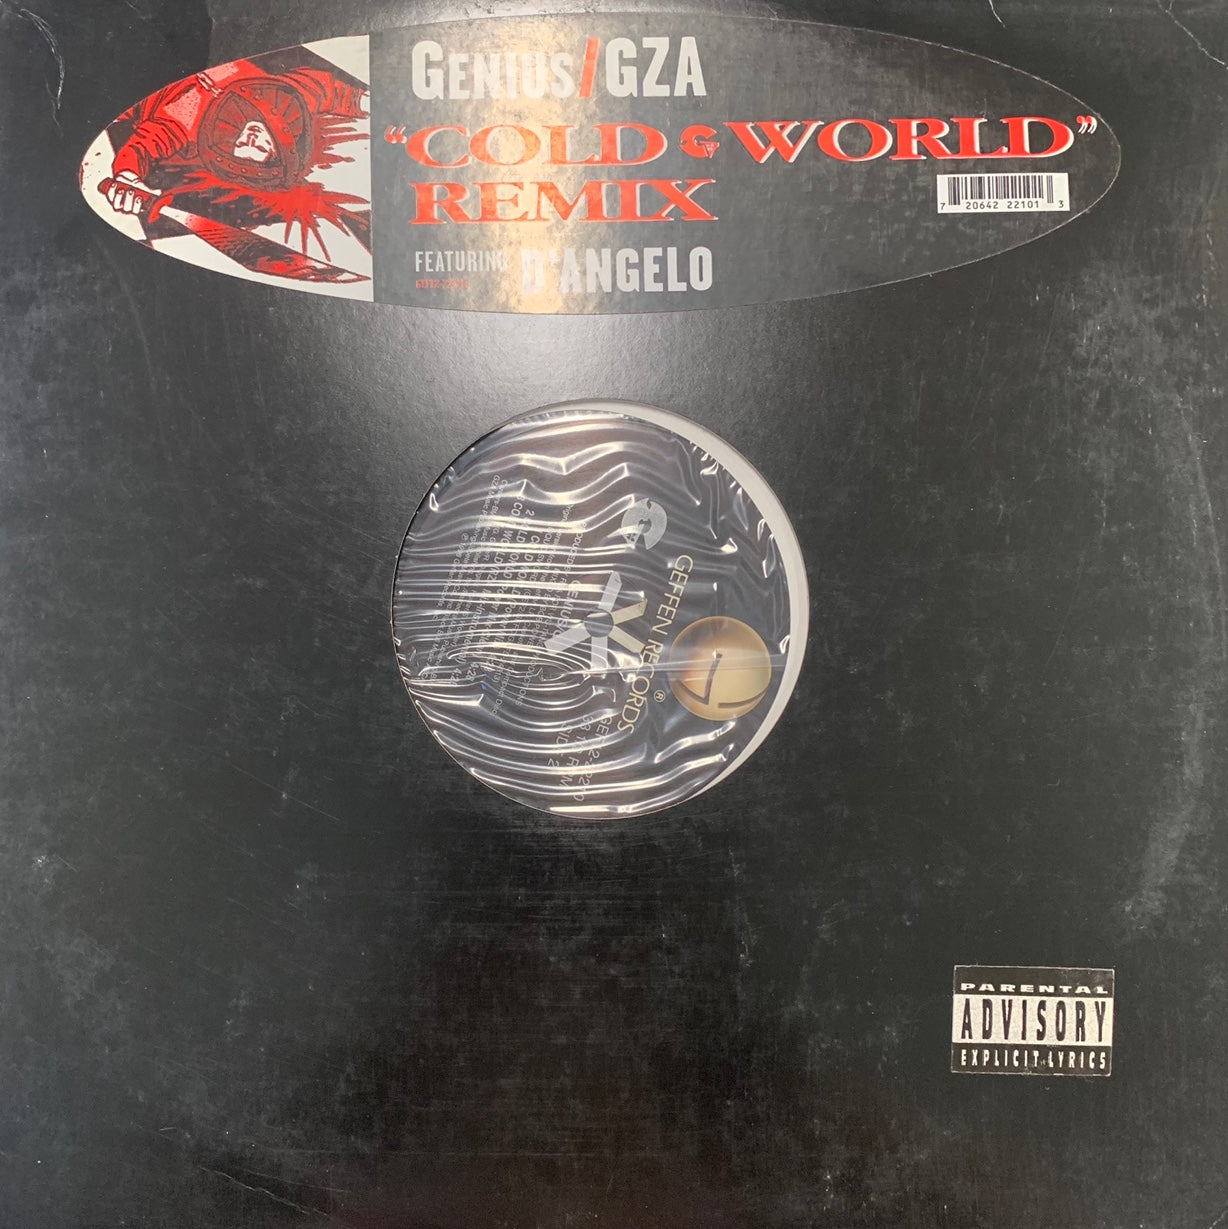 GZA Feat D’angelo “Cold World” remix 5 Version 12inch Vinyl